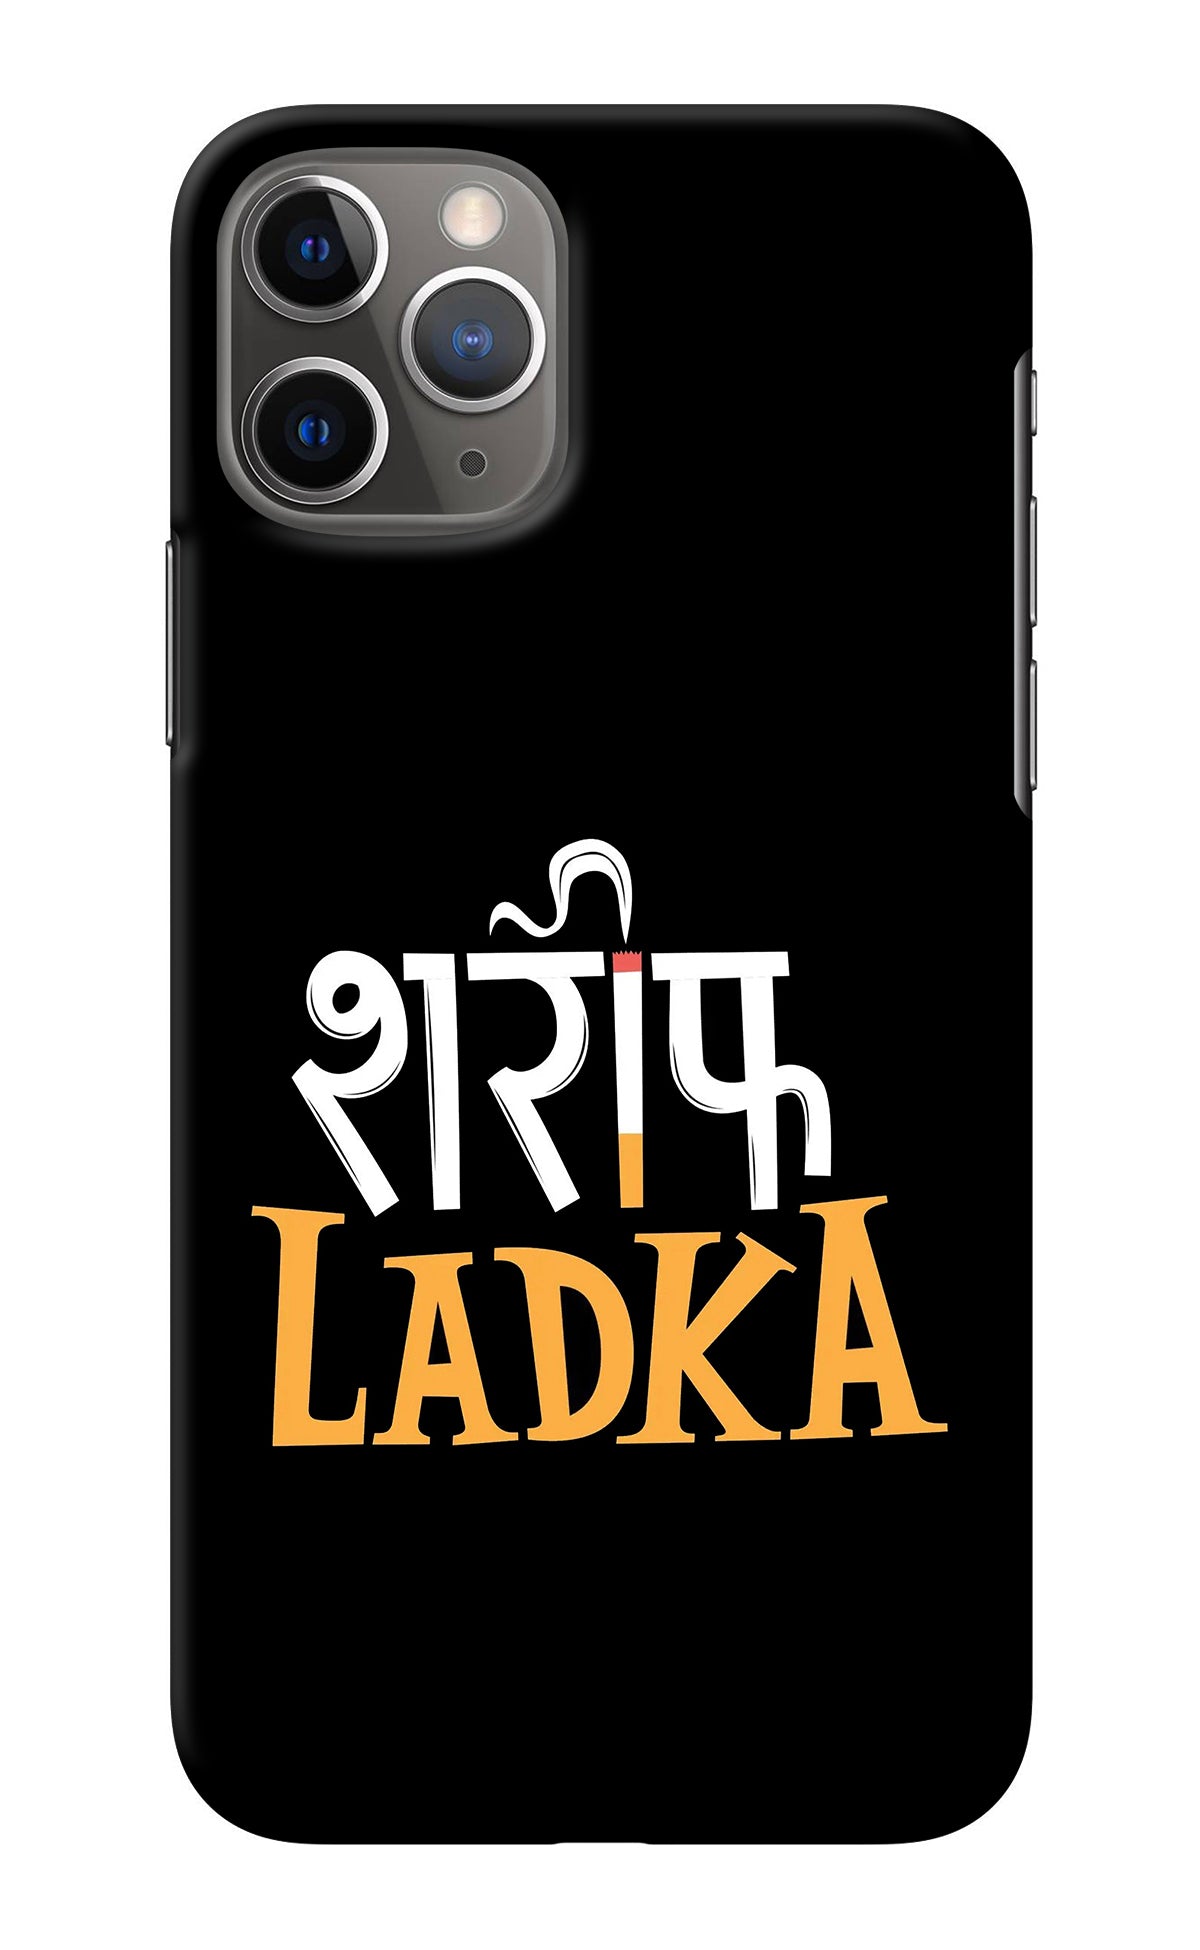 Shareef Ladka iPhone 11 Pro Max Back Cover